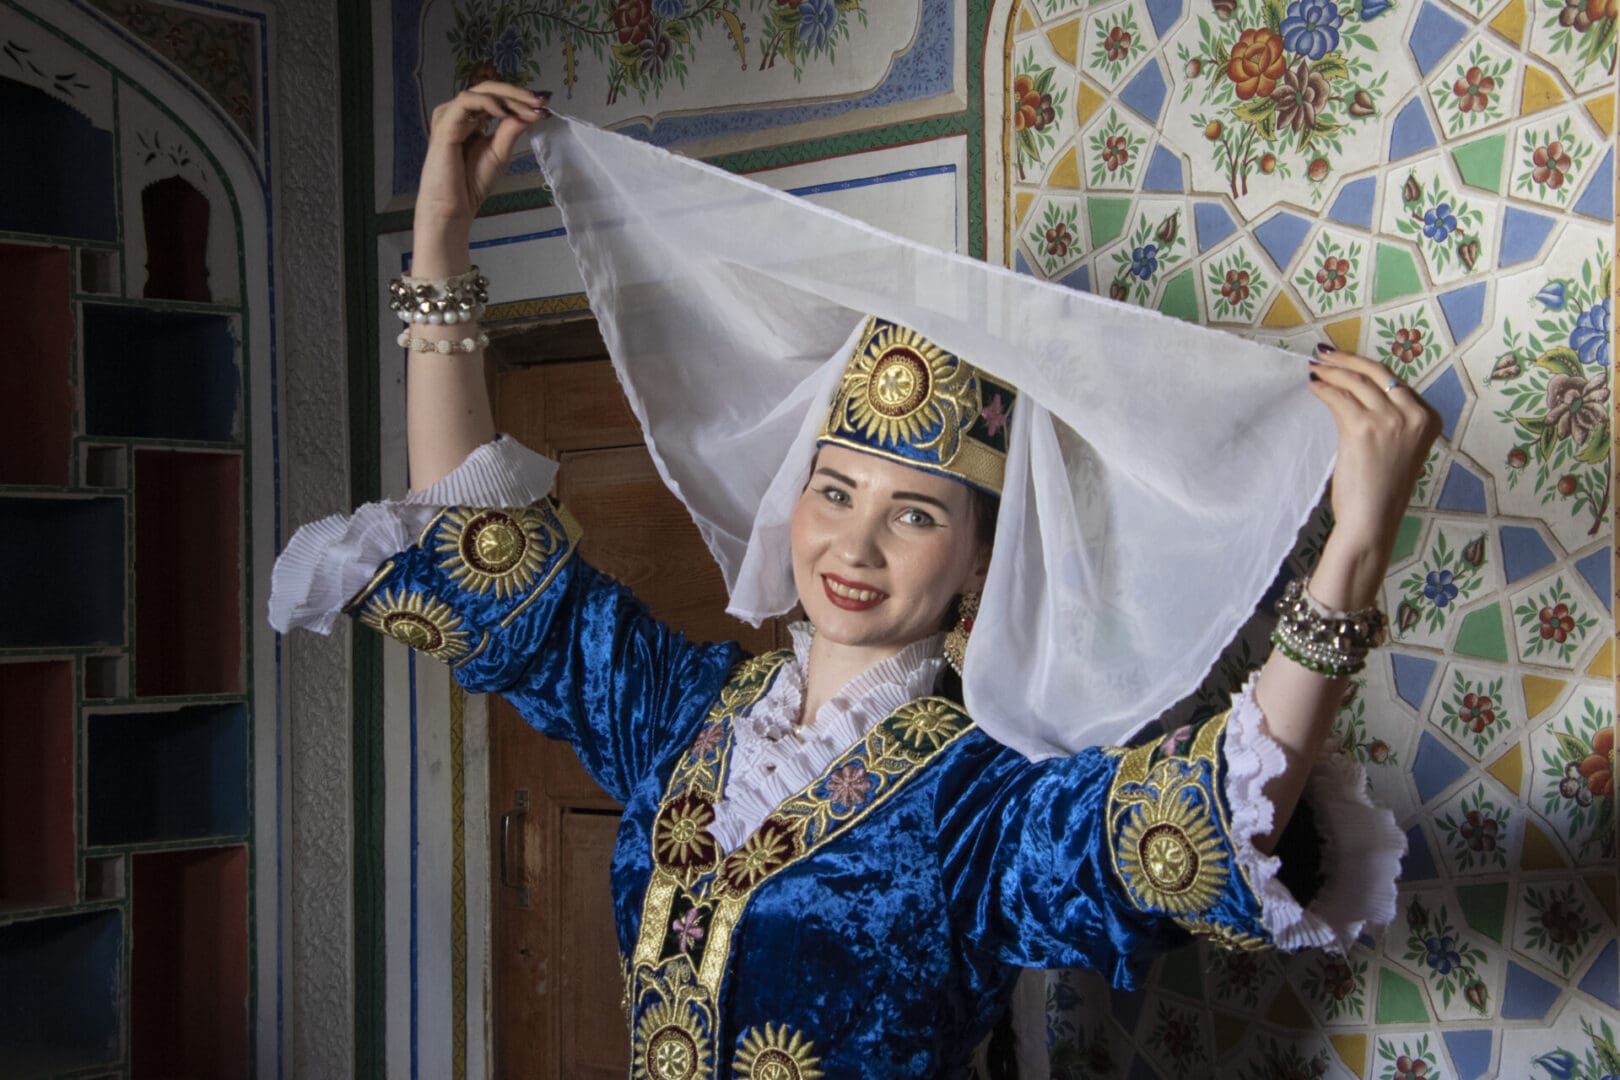 A woman in traditional uzbek costume posing for a photo.